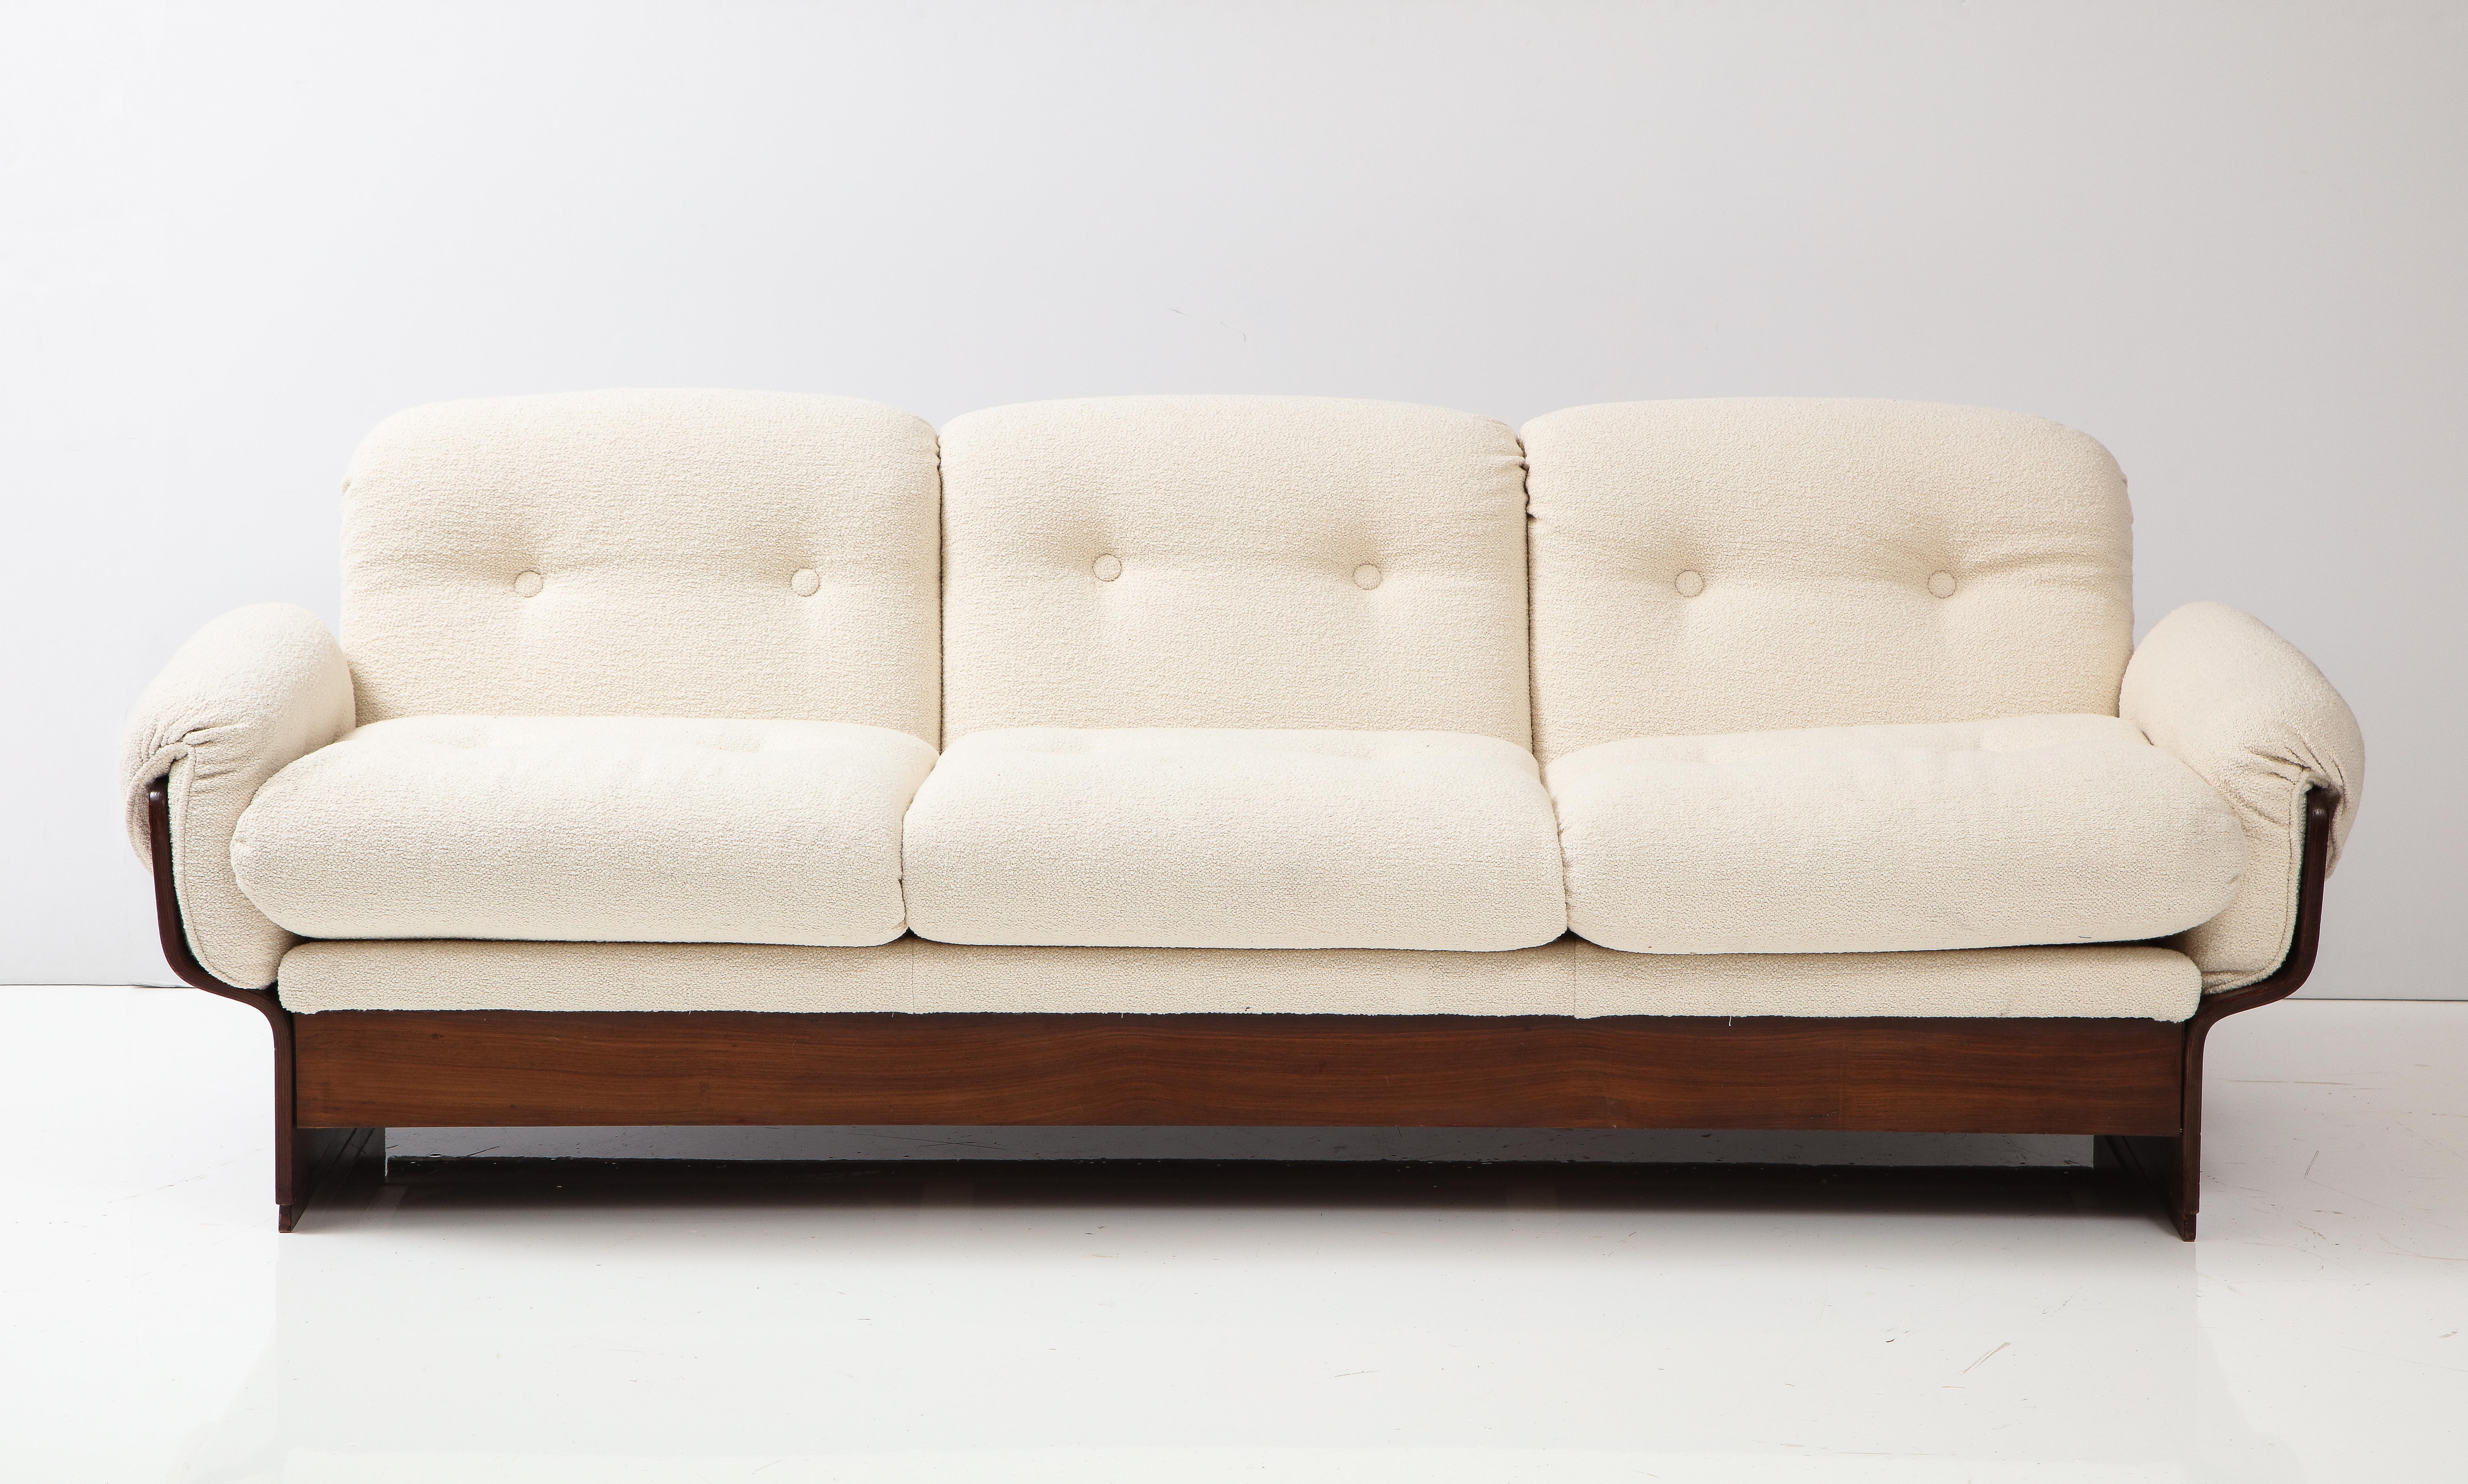 Italian 1960's Palisander Wood Curved Three Seat Upholstered Boucle Sofa In Good Condition For Sale In New York, NY